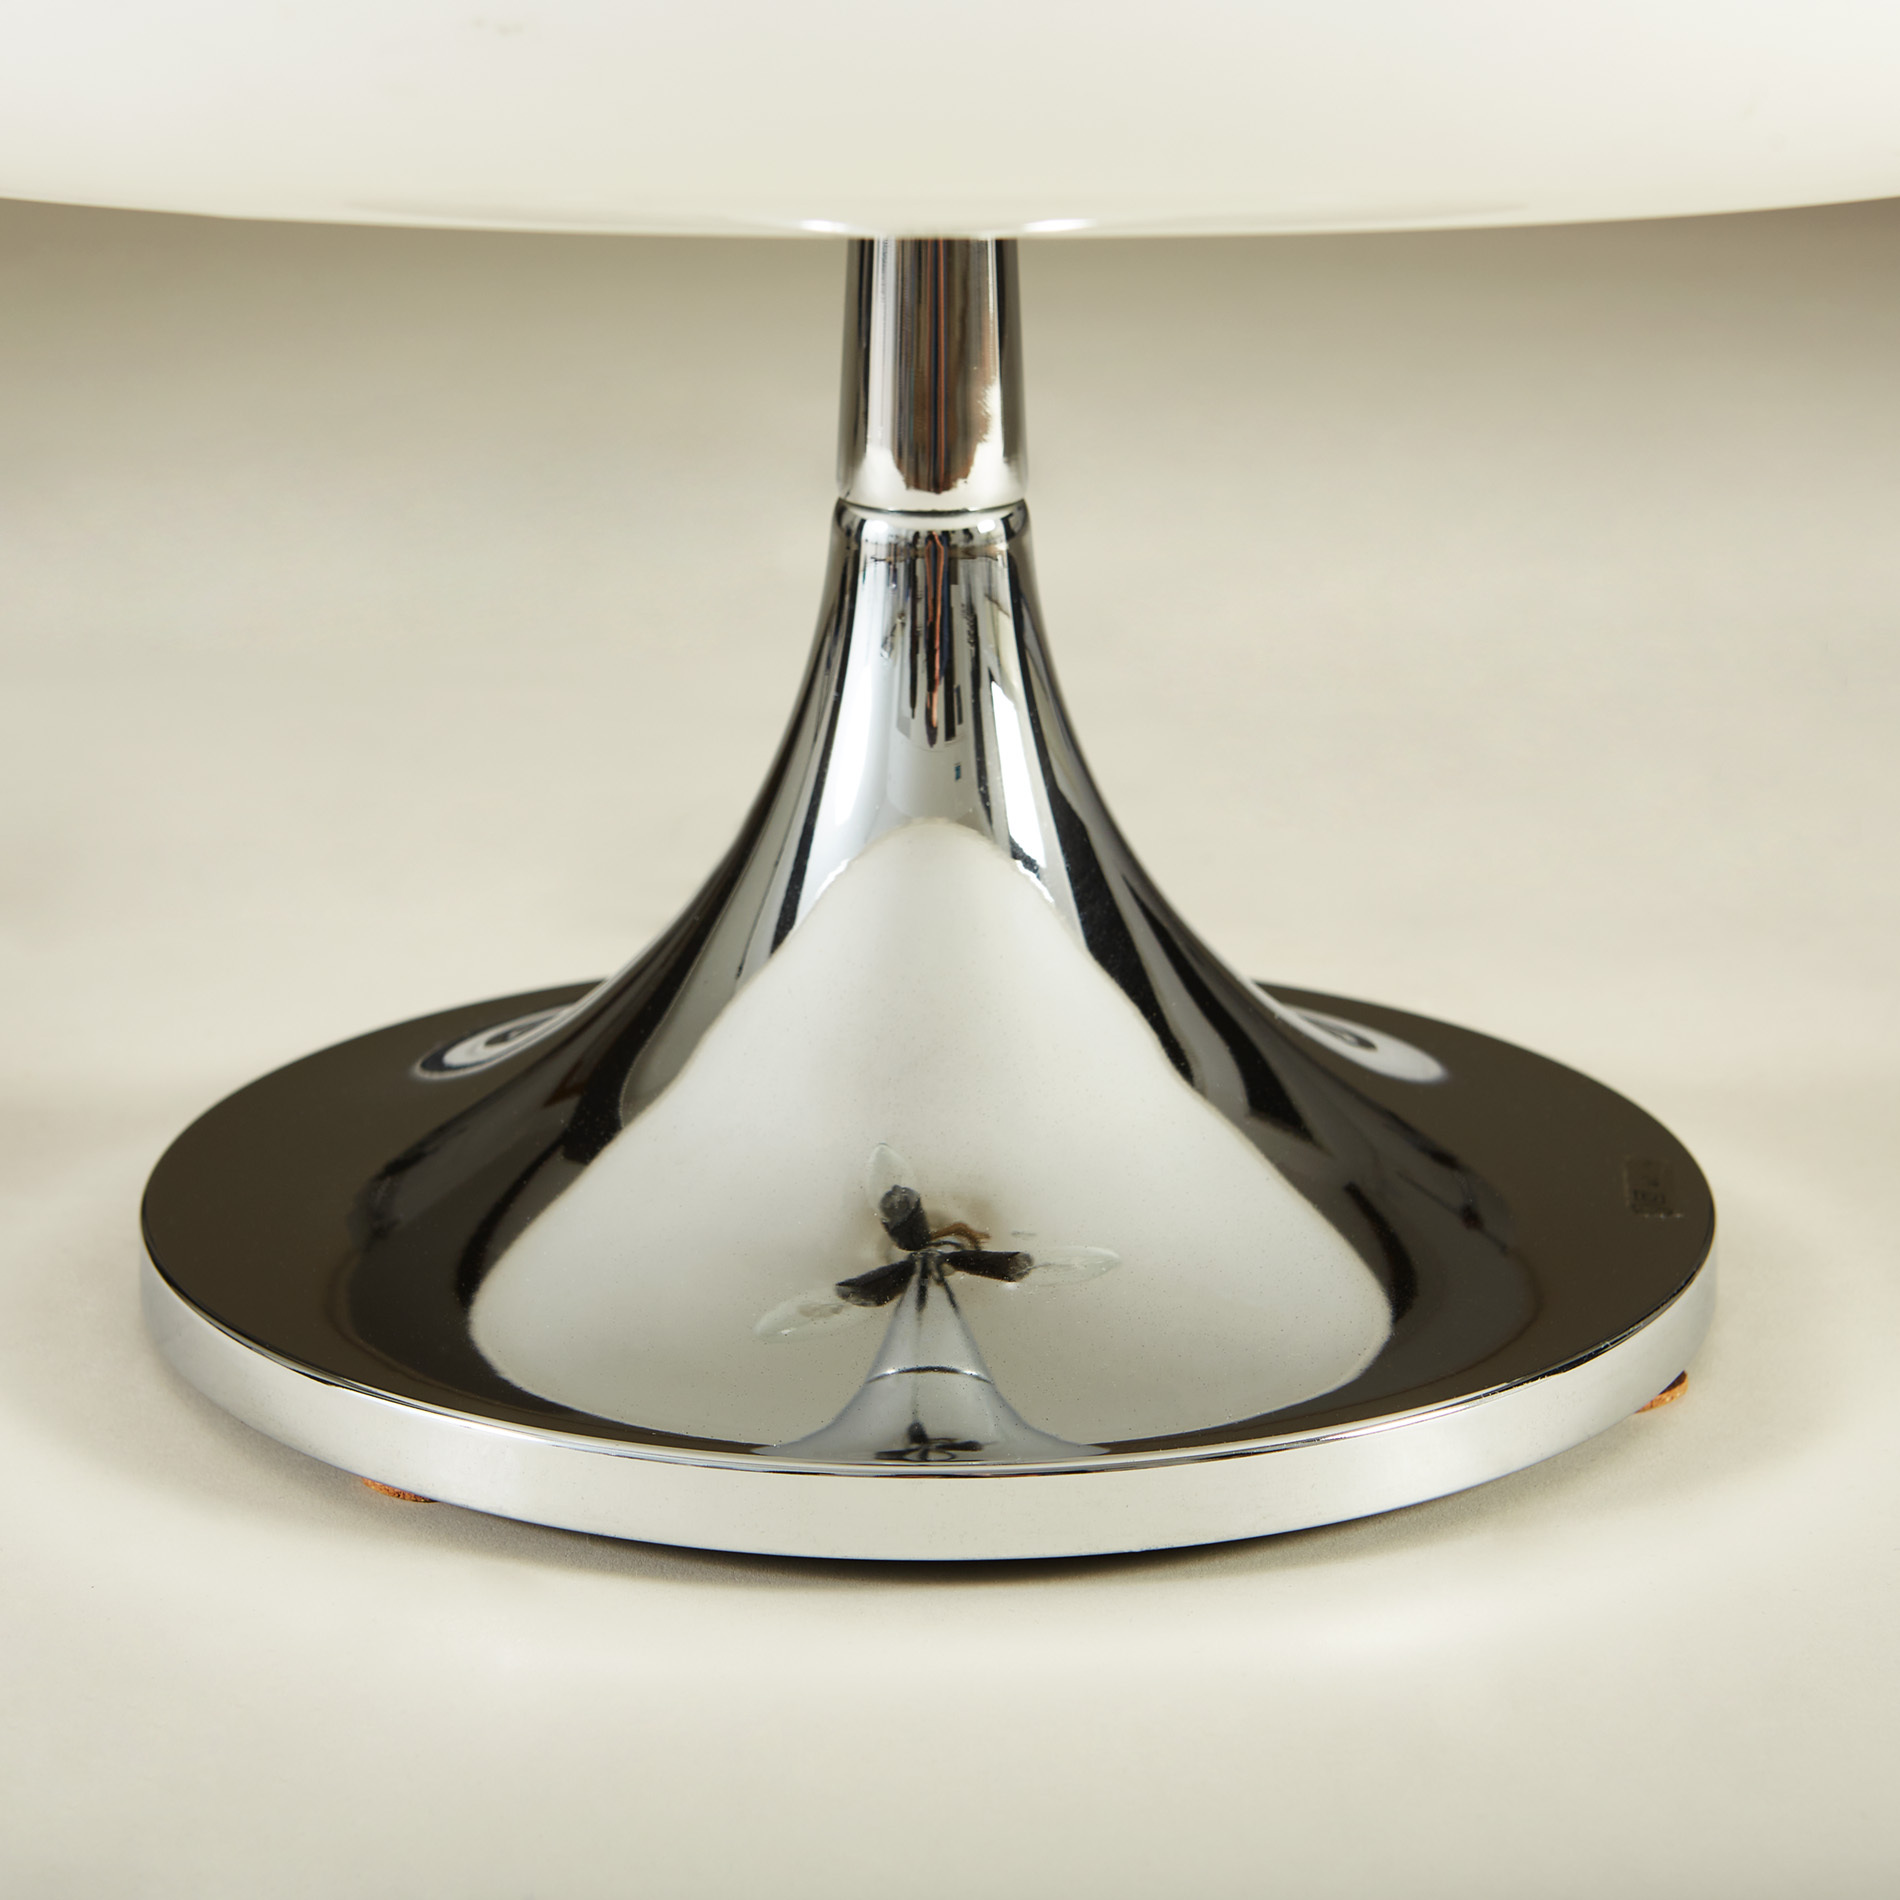 The image for Perspex Dome Table Lamp 237 V1